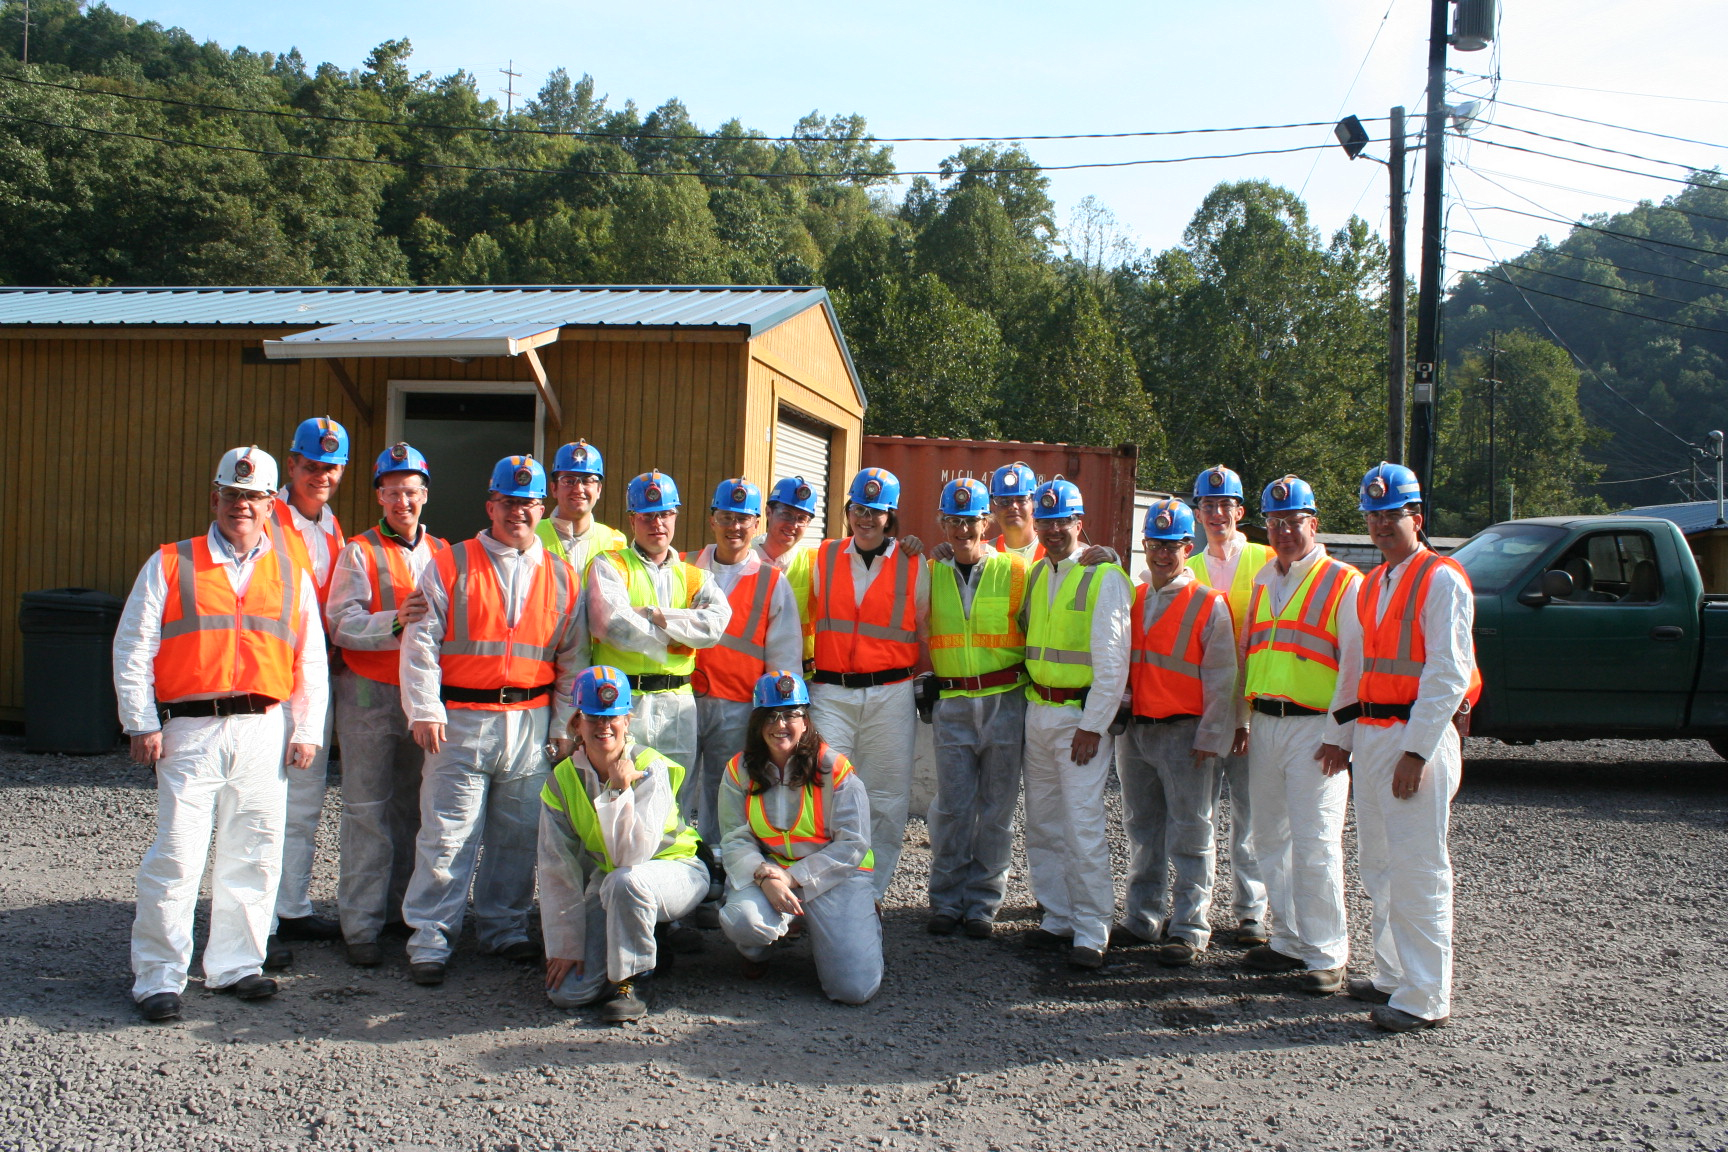 Group photo of people wearing coal mining hats and bright safety vests